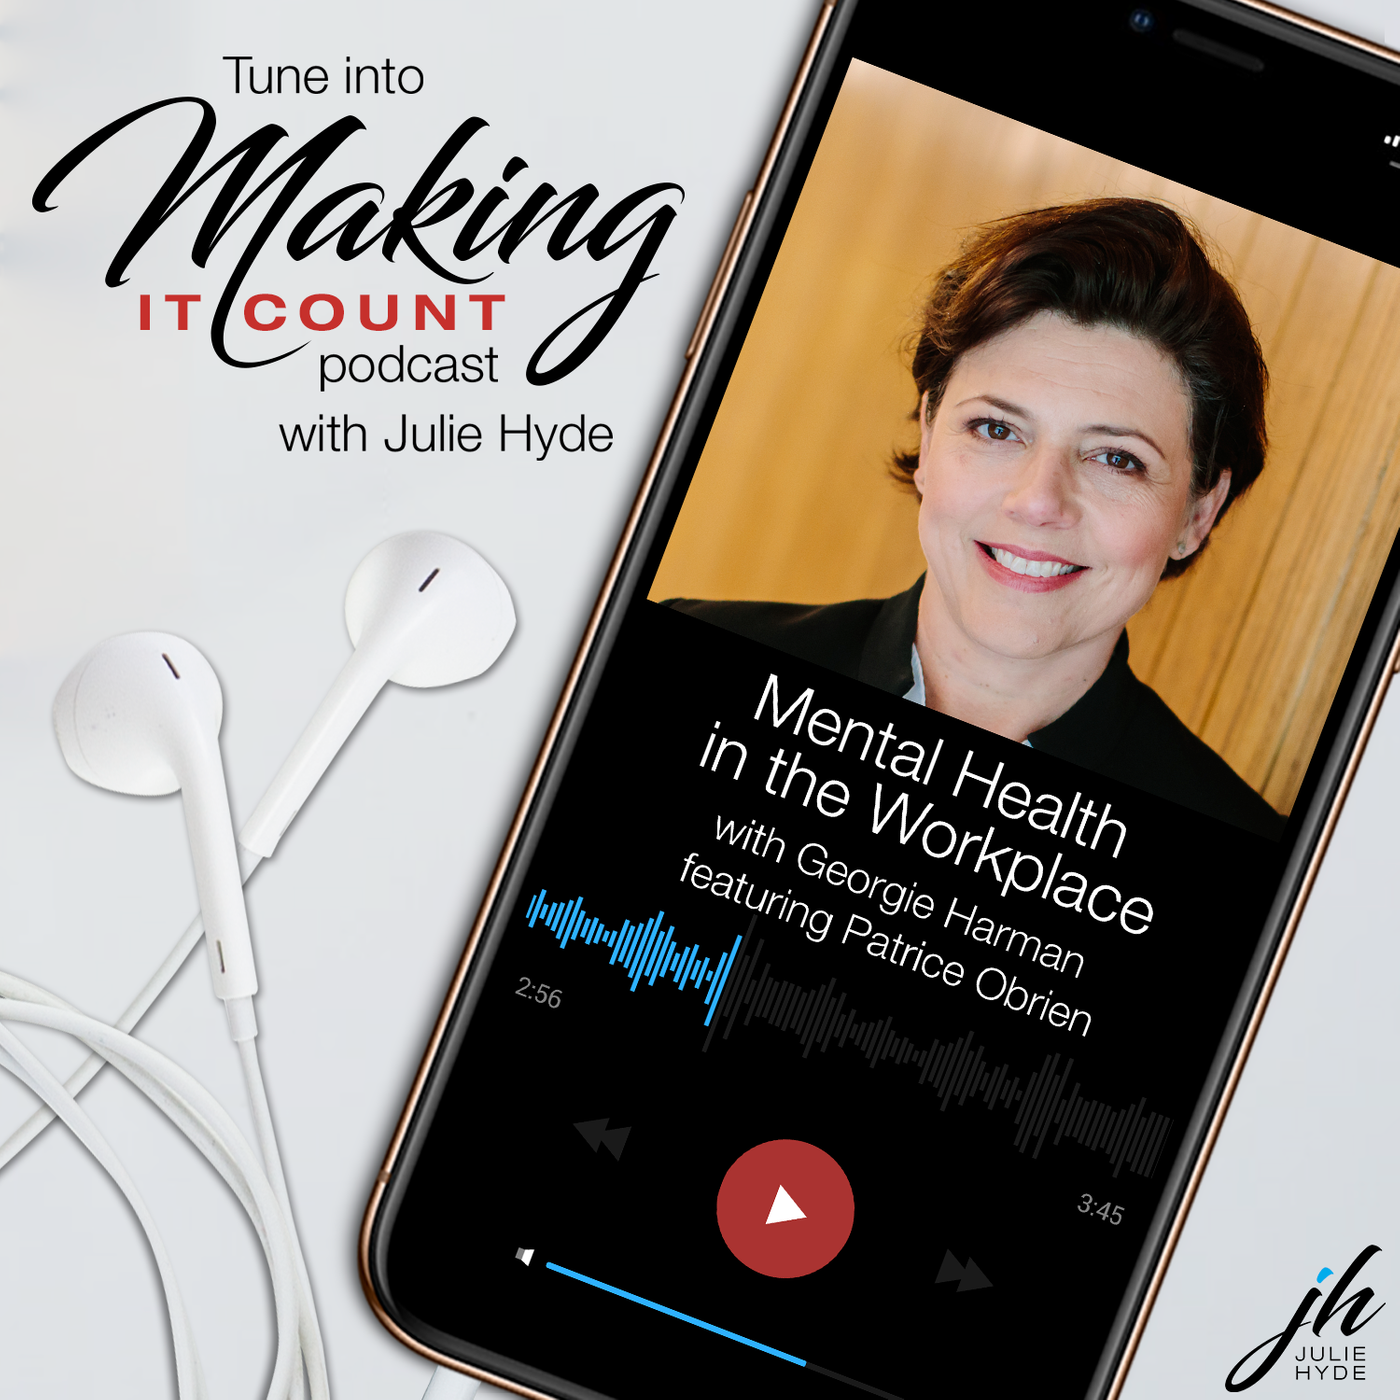 georgie-harman-patrice-obrien-mental-health-in-workplace-julie-hyde-making-it-count-busy-leadership-leader-leaders-keynote-mindset-speaker-mentor-business-empower-lead-empowering-podcast-great-intentional-authentic-mentor-coach-role-model-top-best-inspire-engage-practical-insightful-boost-performance-tips-how-to-strategy-powerful-change-mindset-thrive-results-corporate-future-smart-program-mentorship-career-next-level-step-reconnect-control-proactive-agile-adaptable-one-on-one-woman-lady-boss-female-sydney-australia-speaker-host-guide-guidance-business-ceo-management